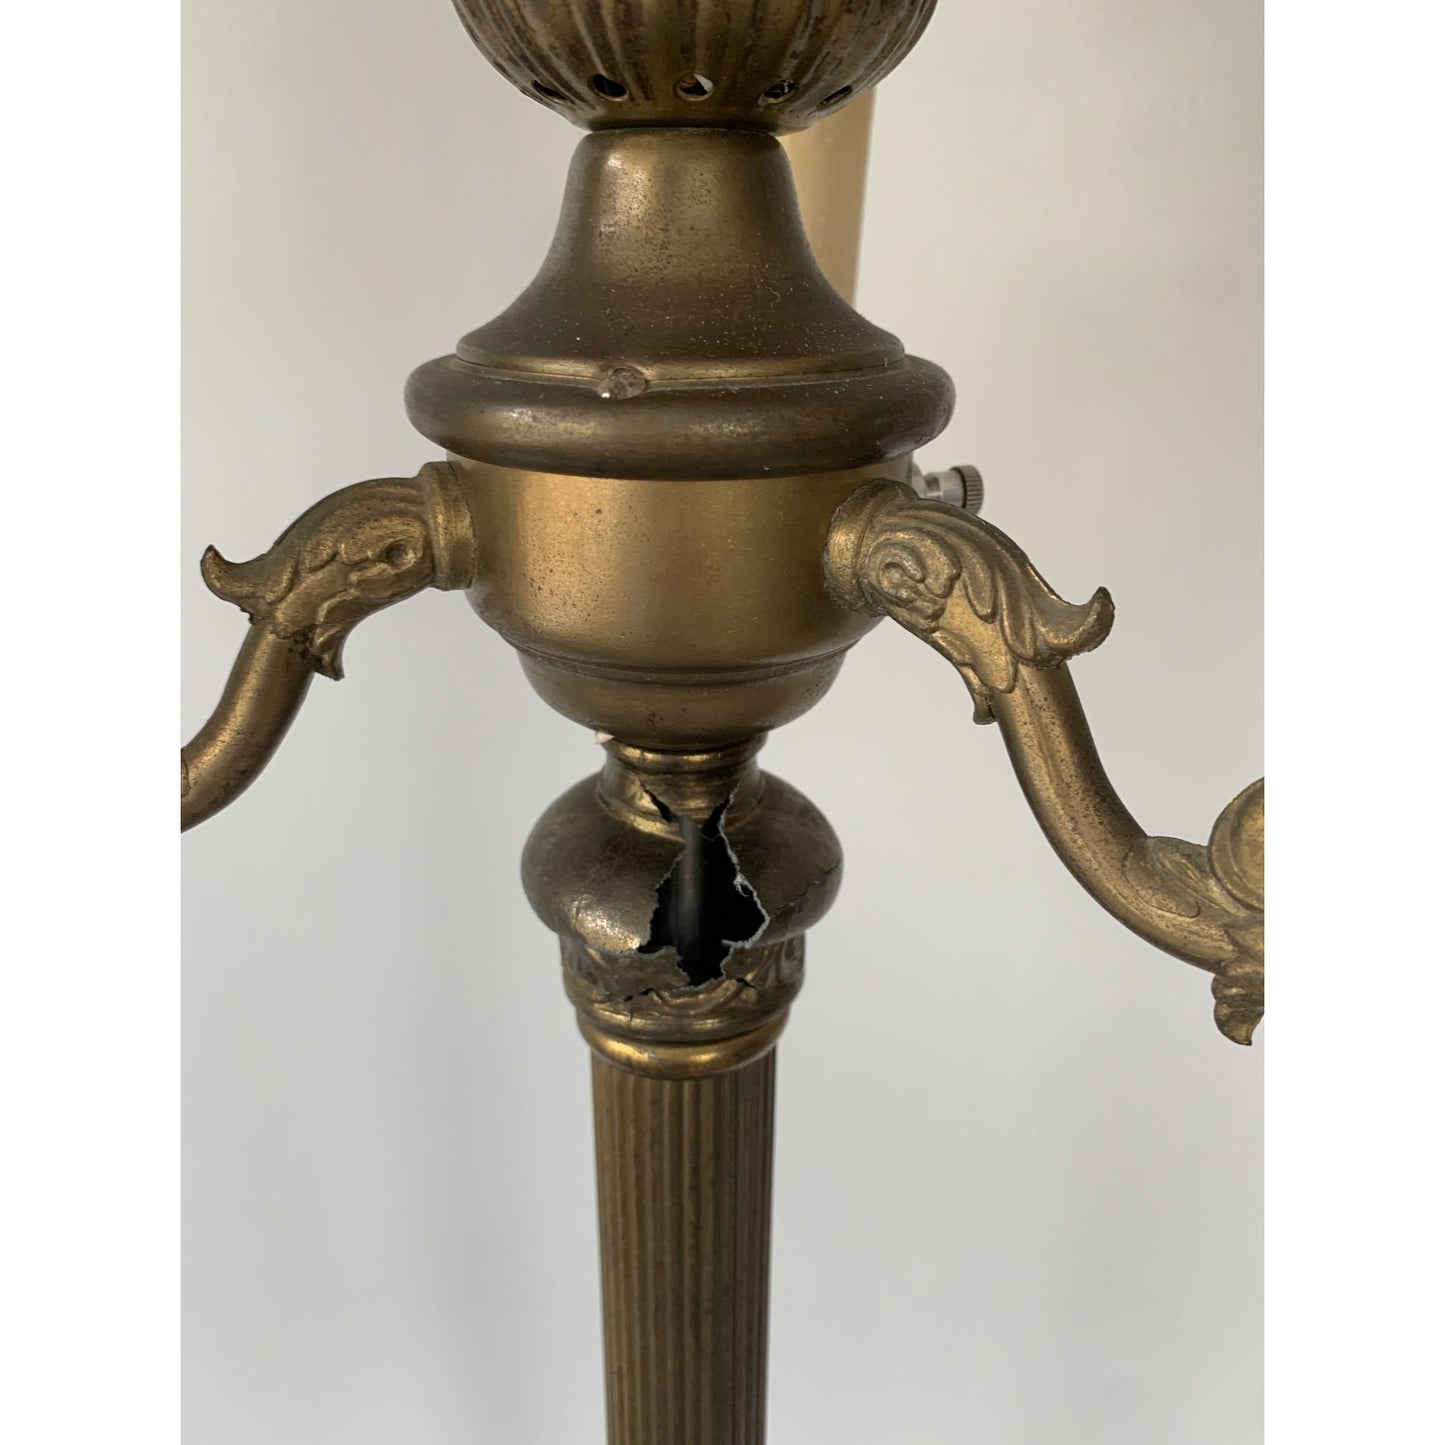 Antique Brass Torchiere 4 Lamp Floor Lamp With Glass Shade